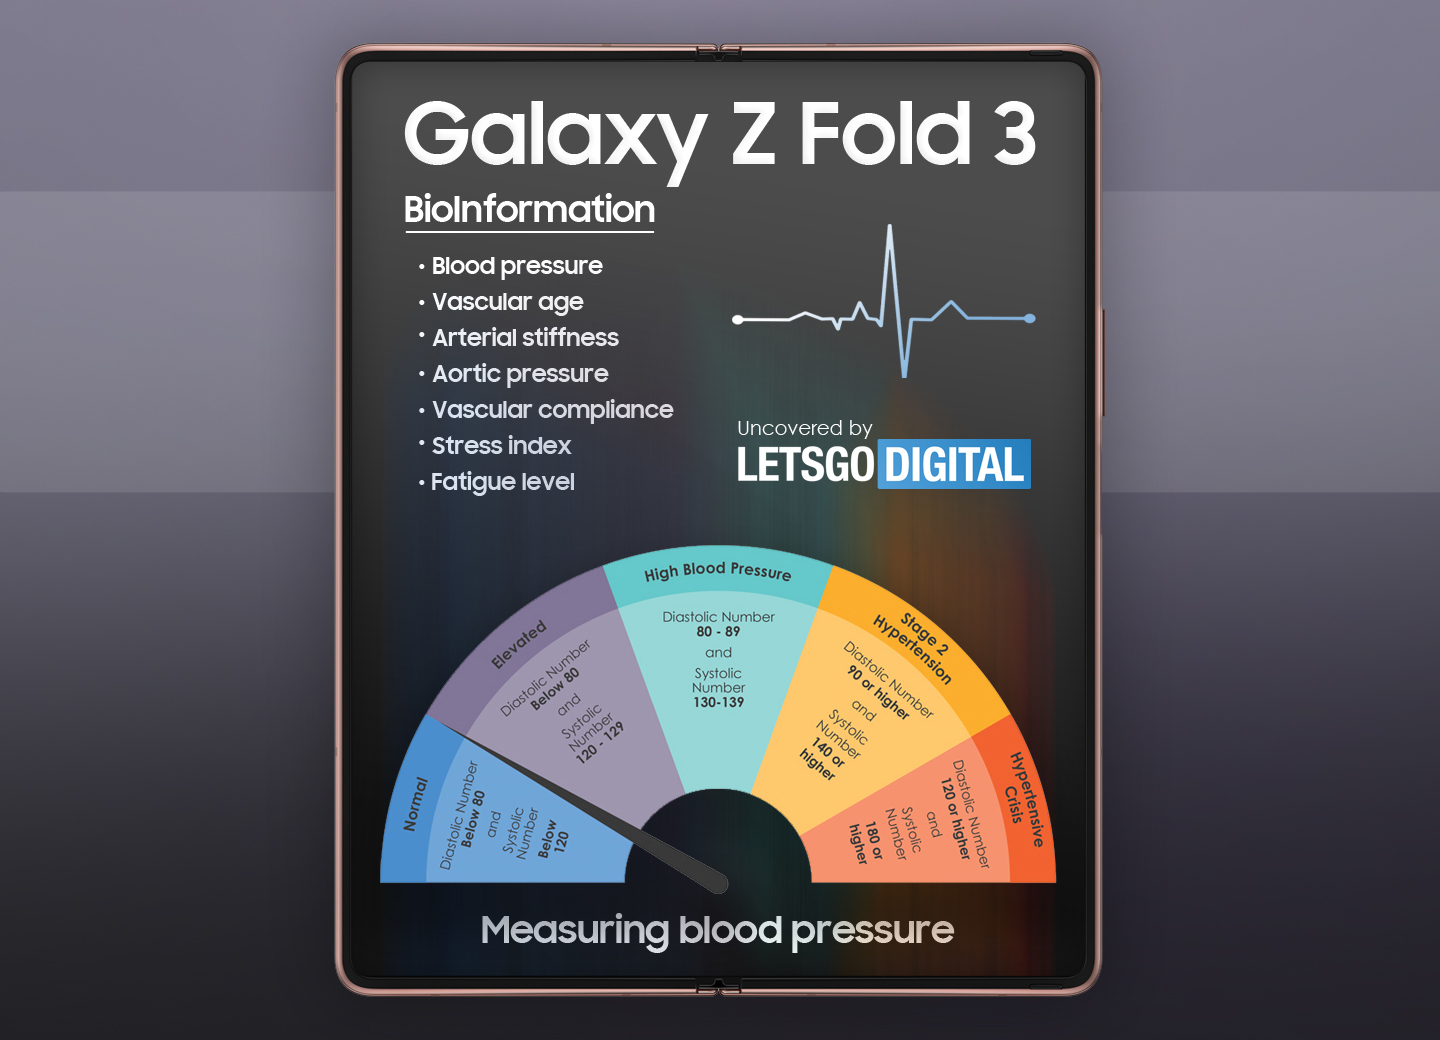 Samsung is working on foldable smartphones that can measure blood pressure and cholesterol level